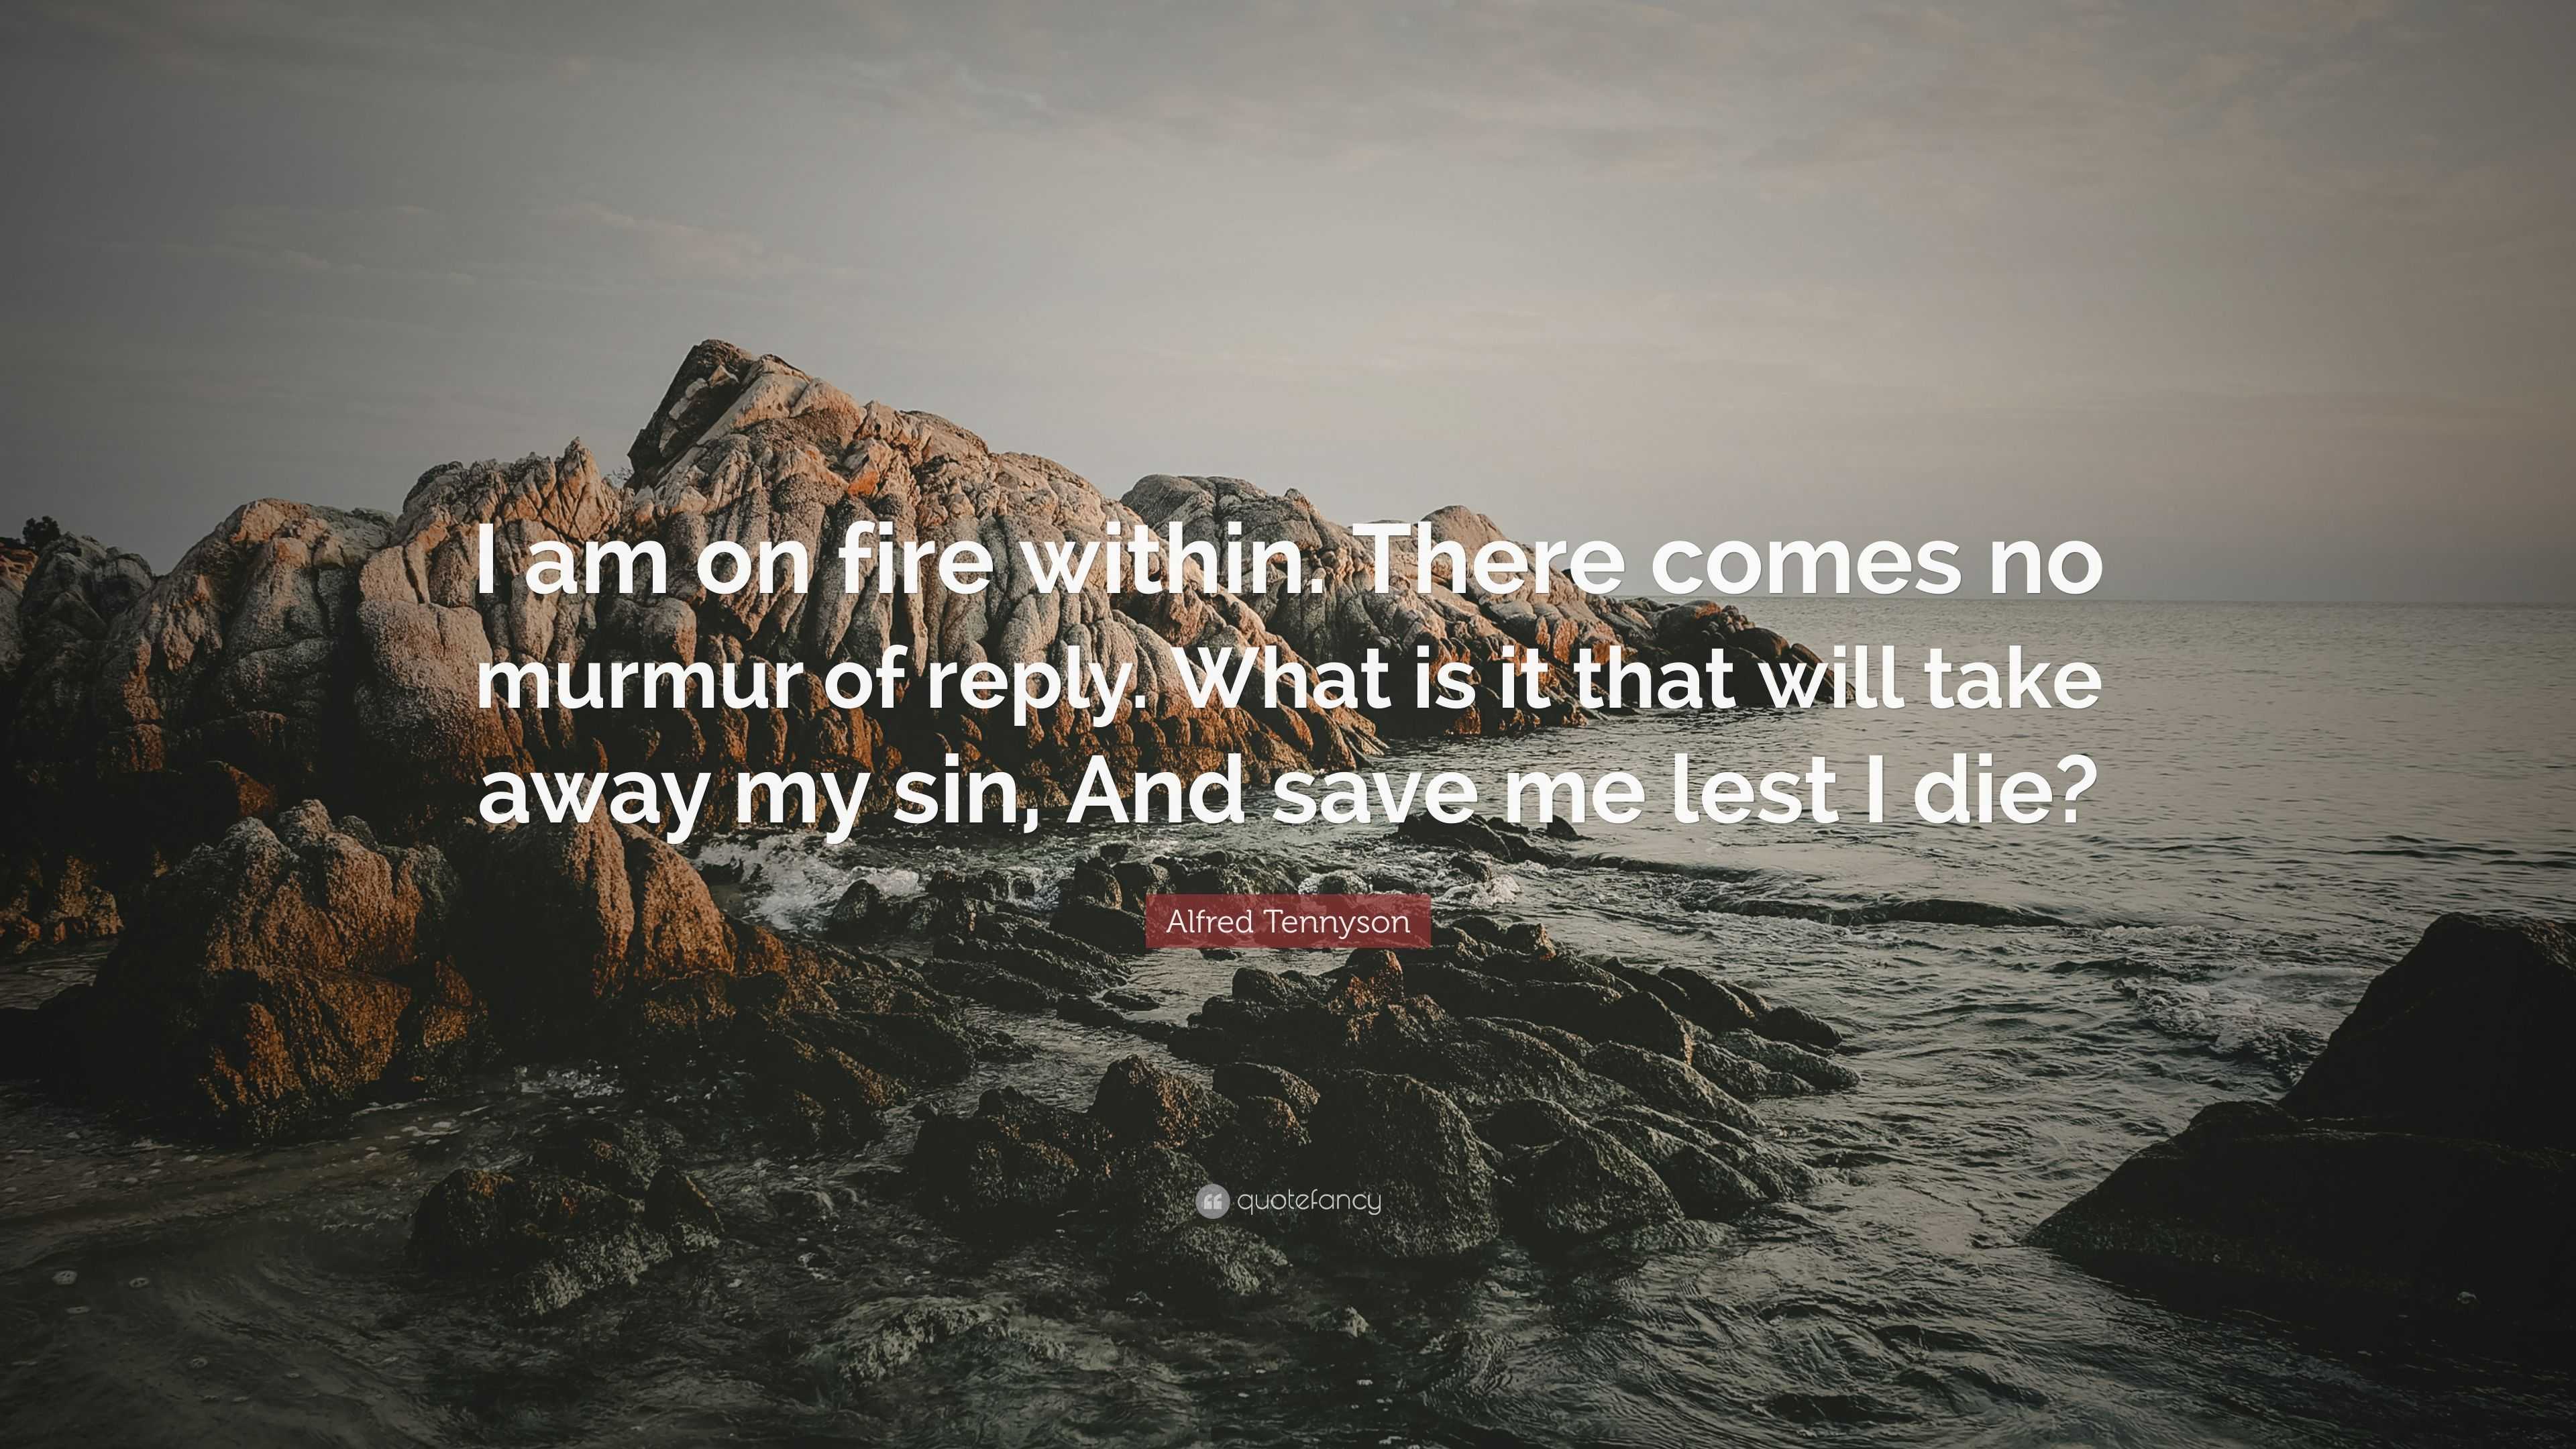 Alfred Tennyson Quote “I am on fire within. There comes